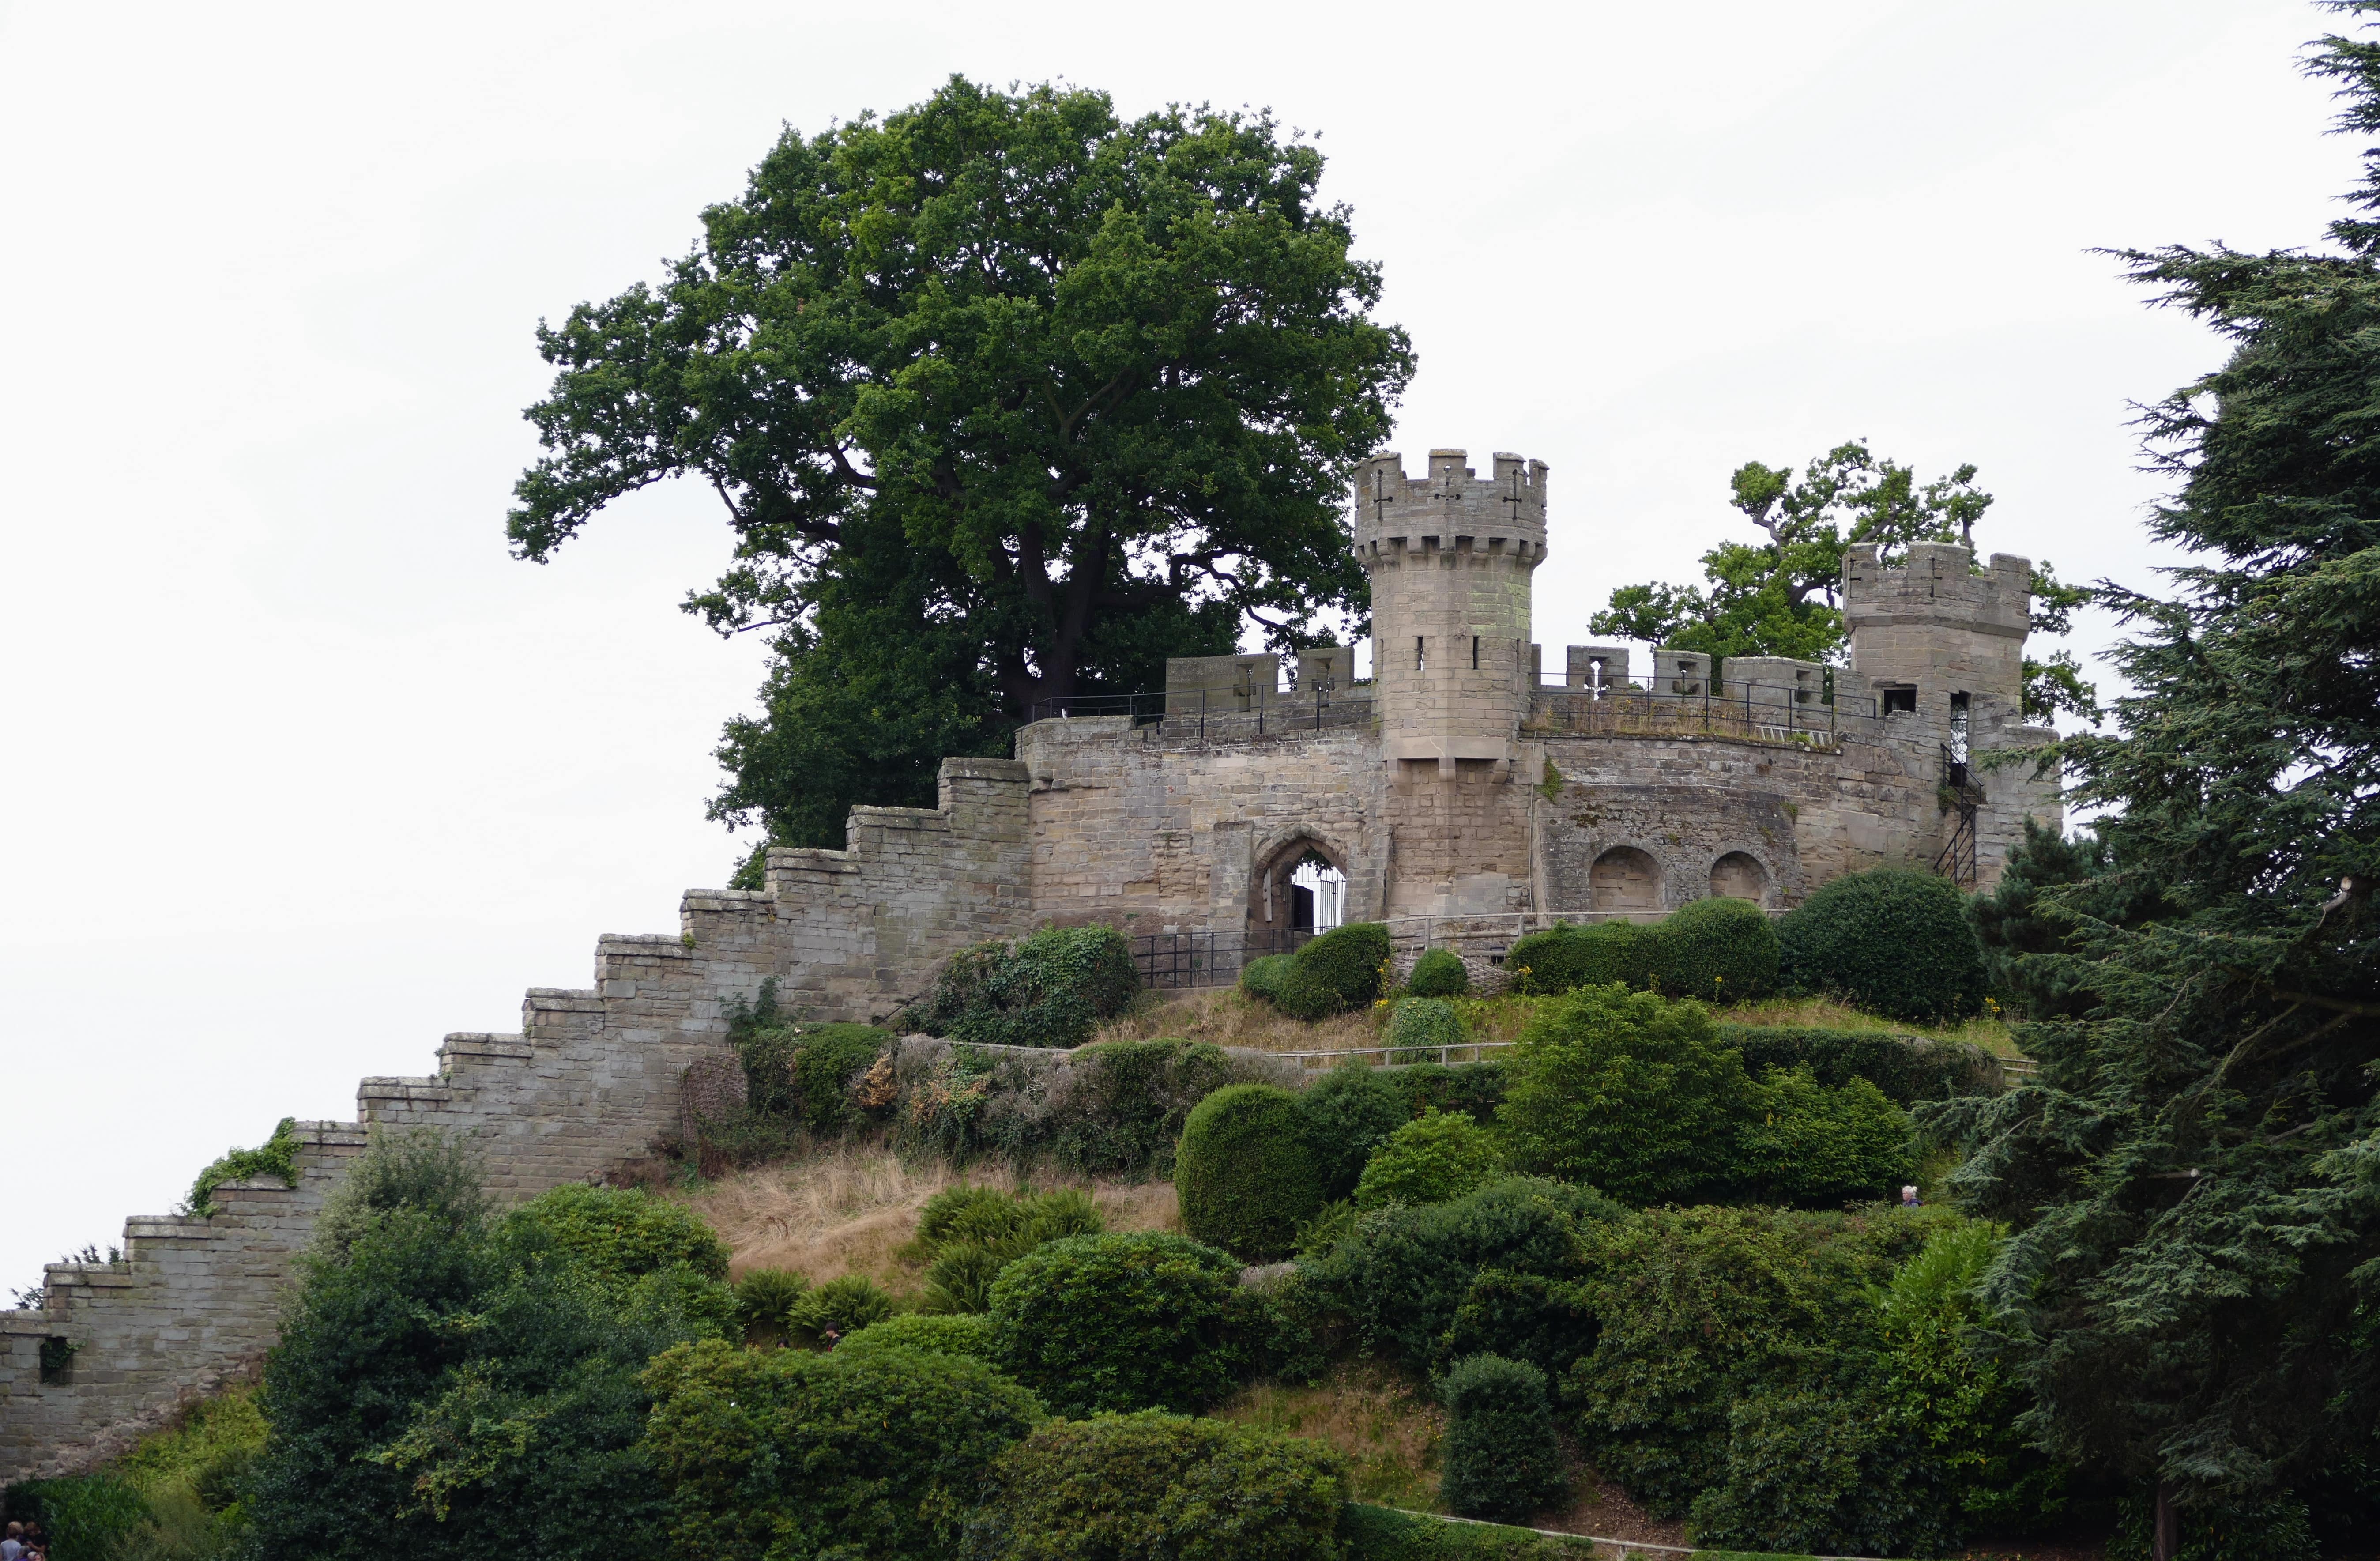 A trip to Warwick Castle is a great way to teach history to your kids while on holiday